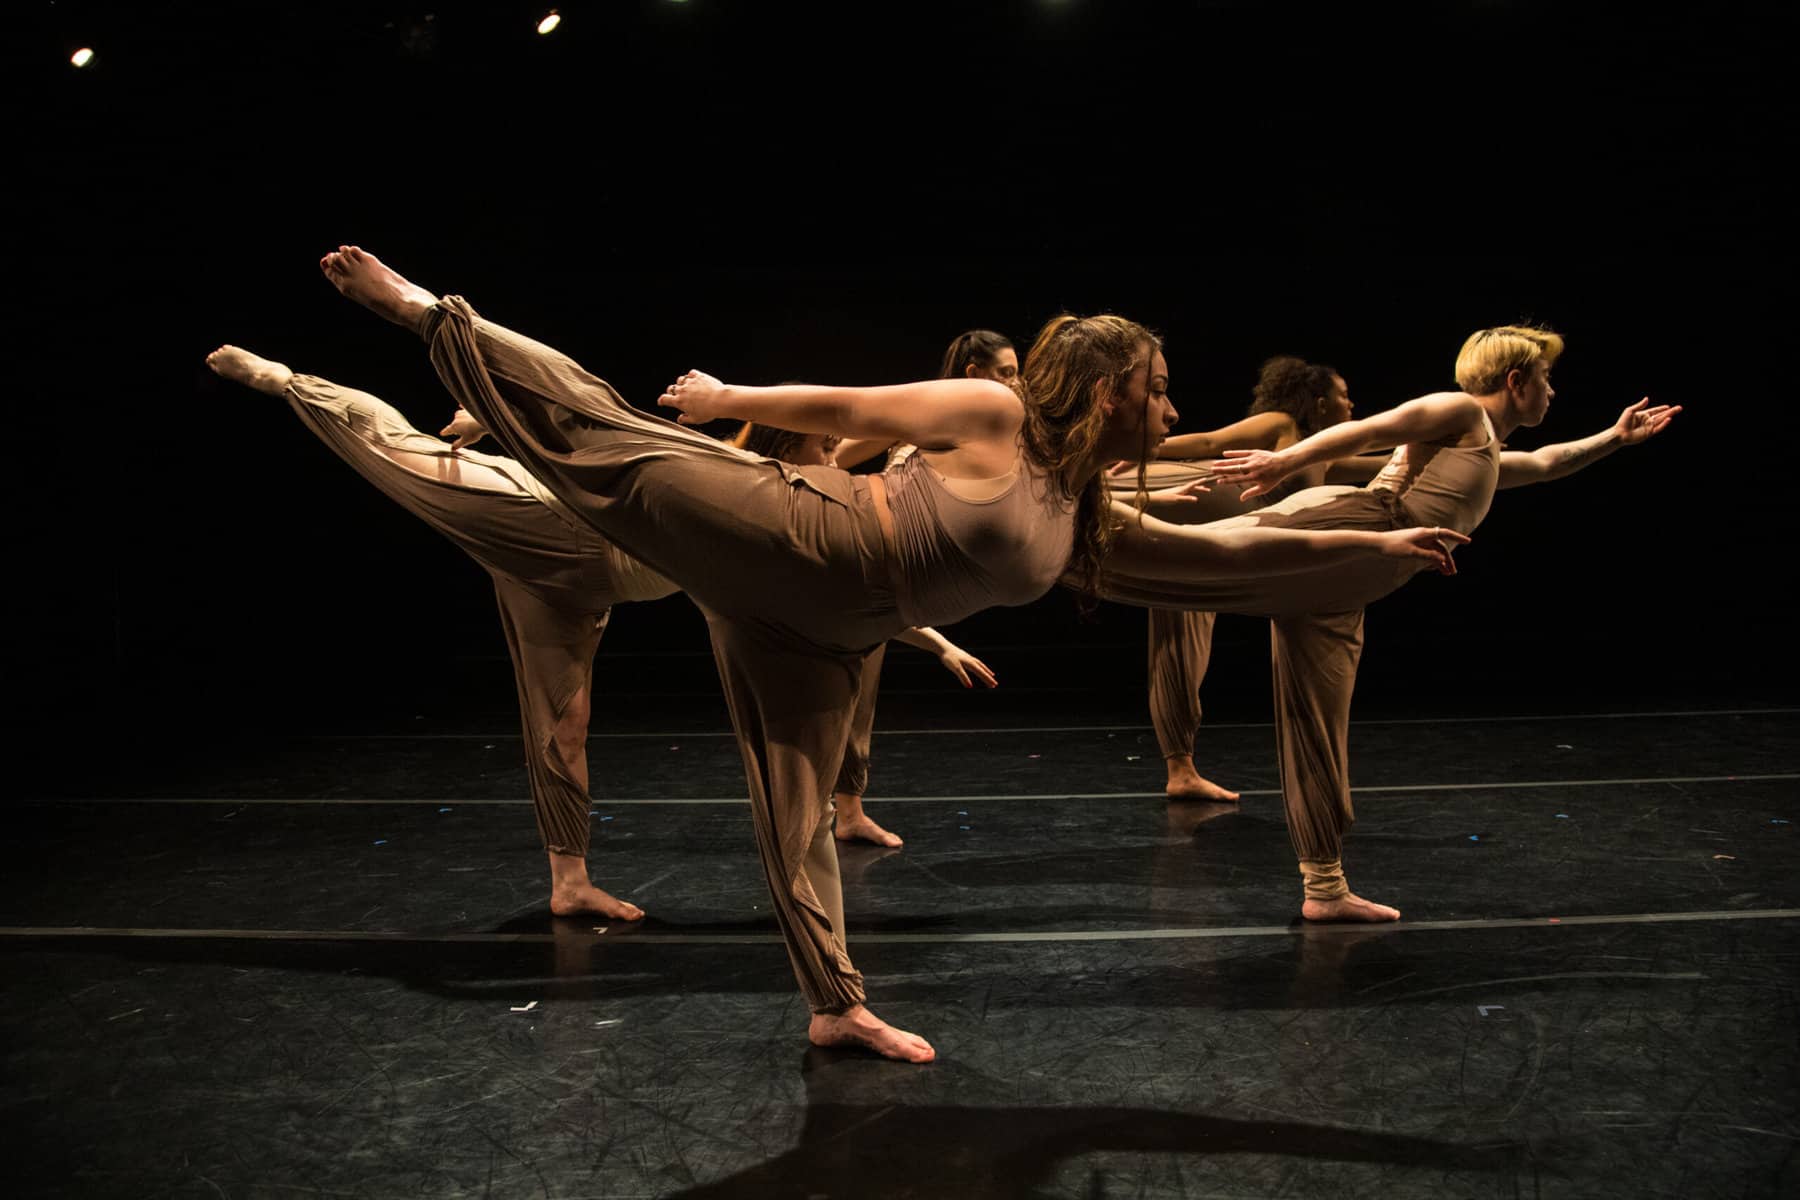 Dancers in a performance at University of San Francisco